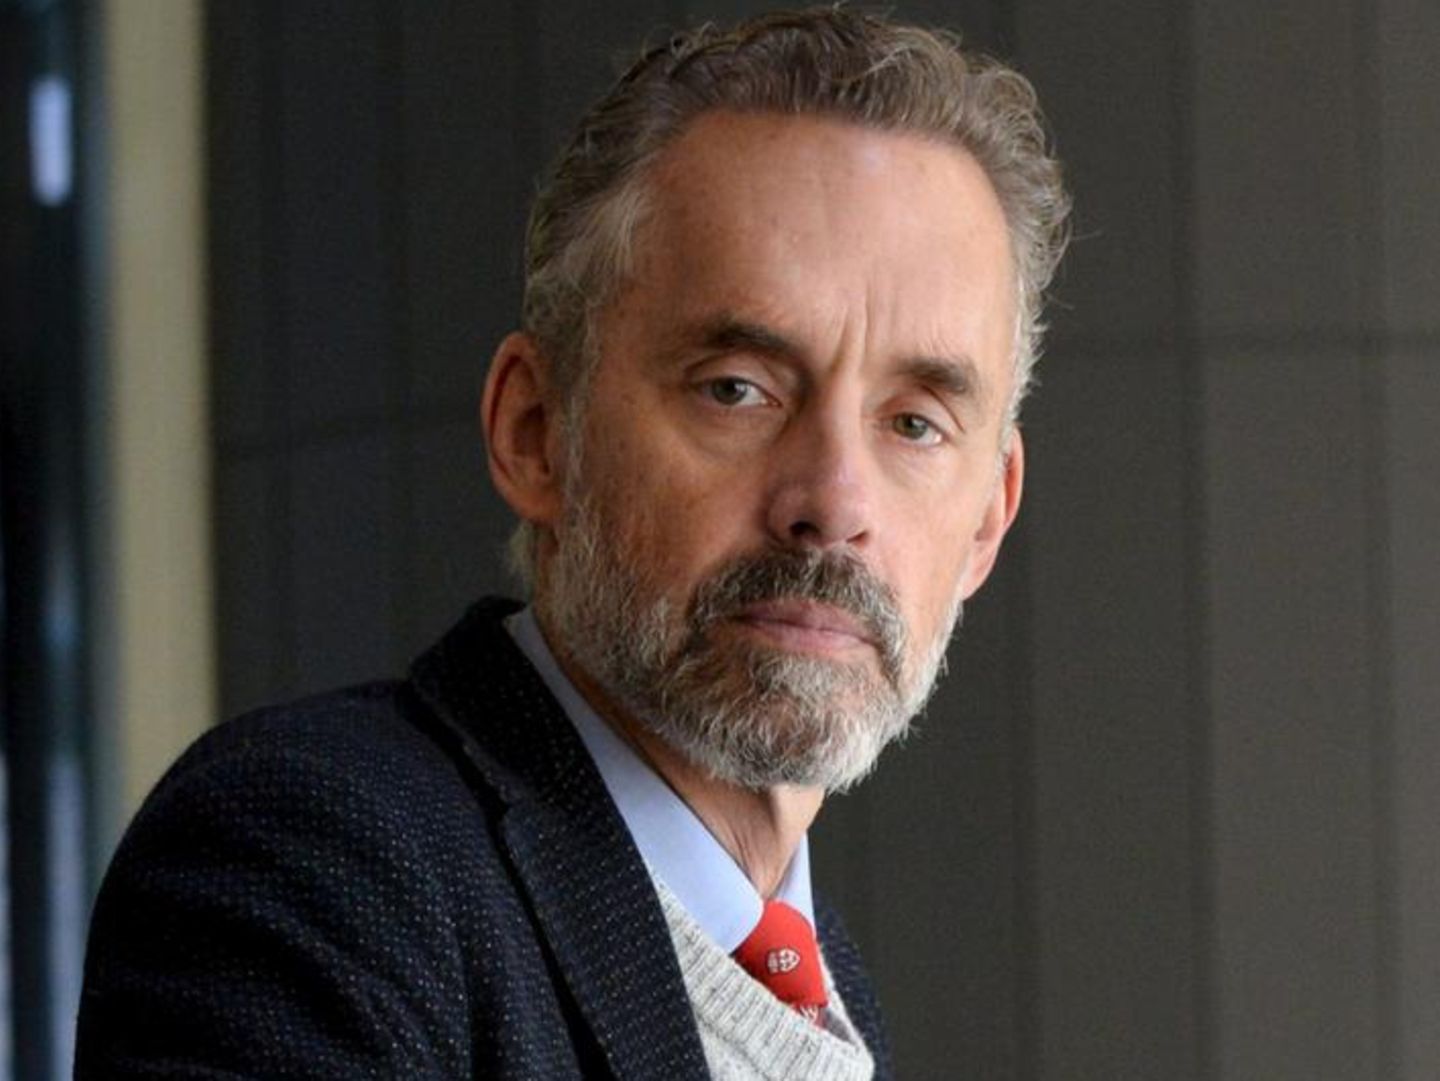 Jordan Peterson wearing a blue suit with a straight face